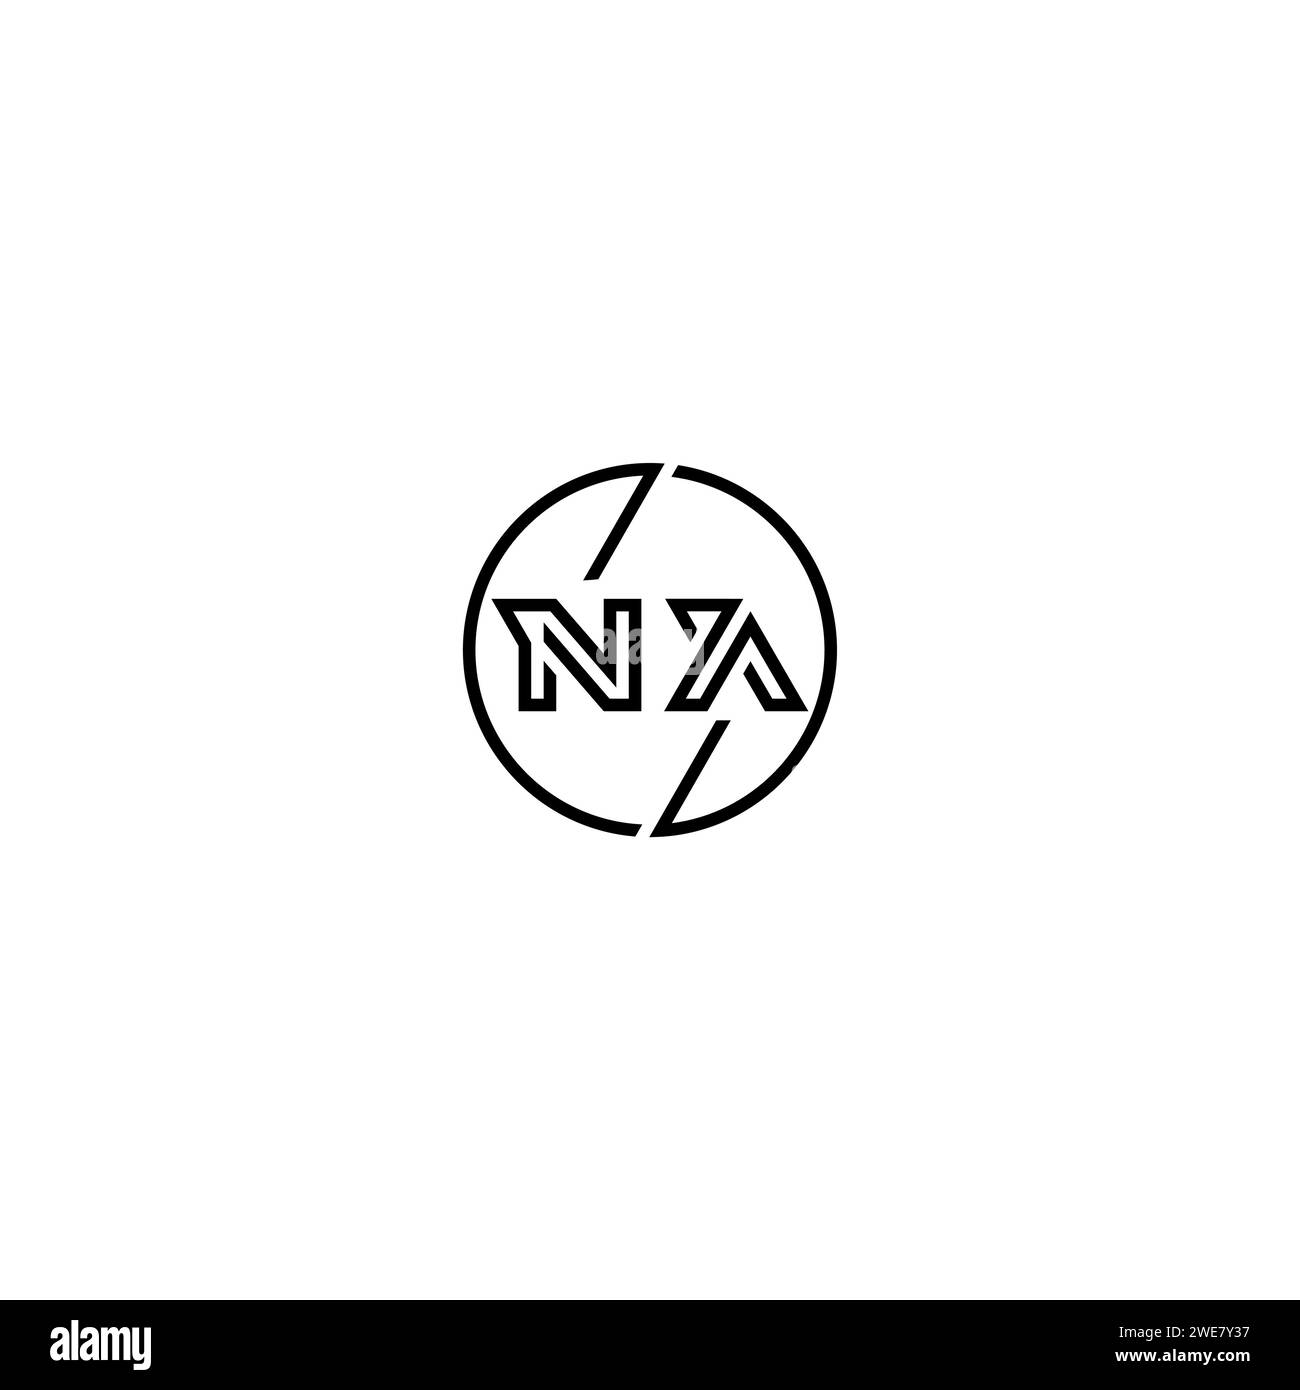 NA simple outline concept logo and circle of initial design black and white background Stock Vector